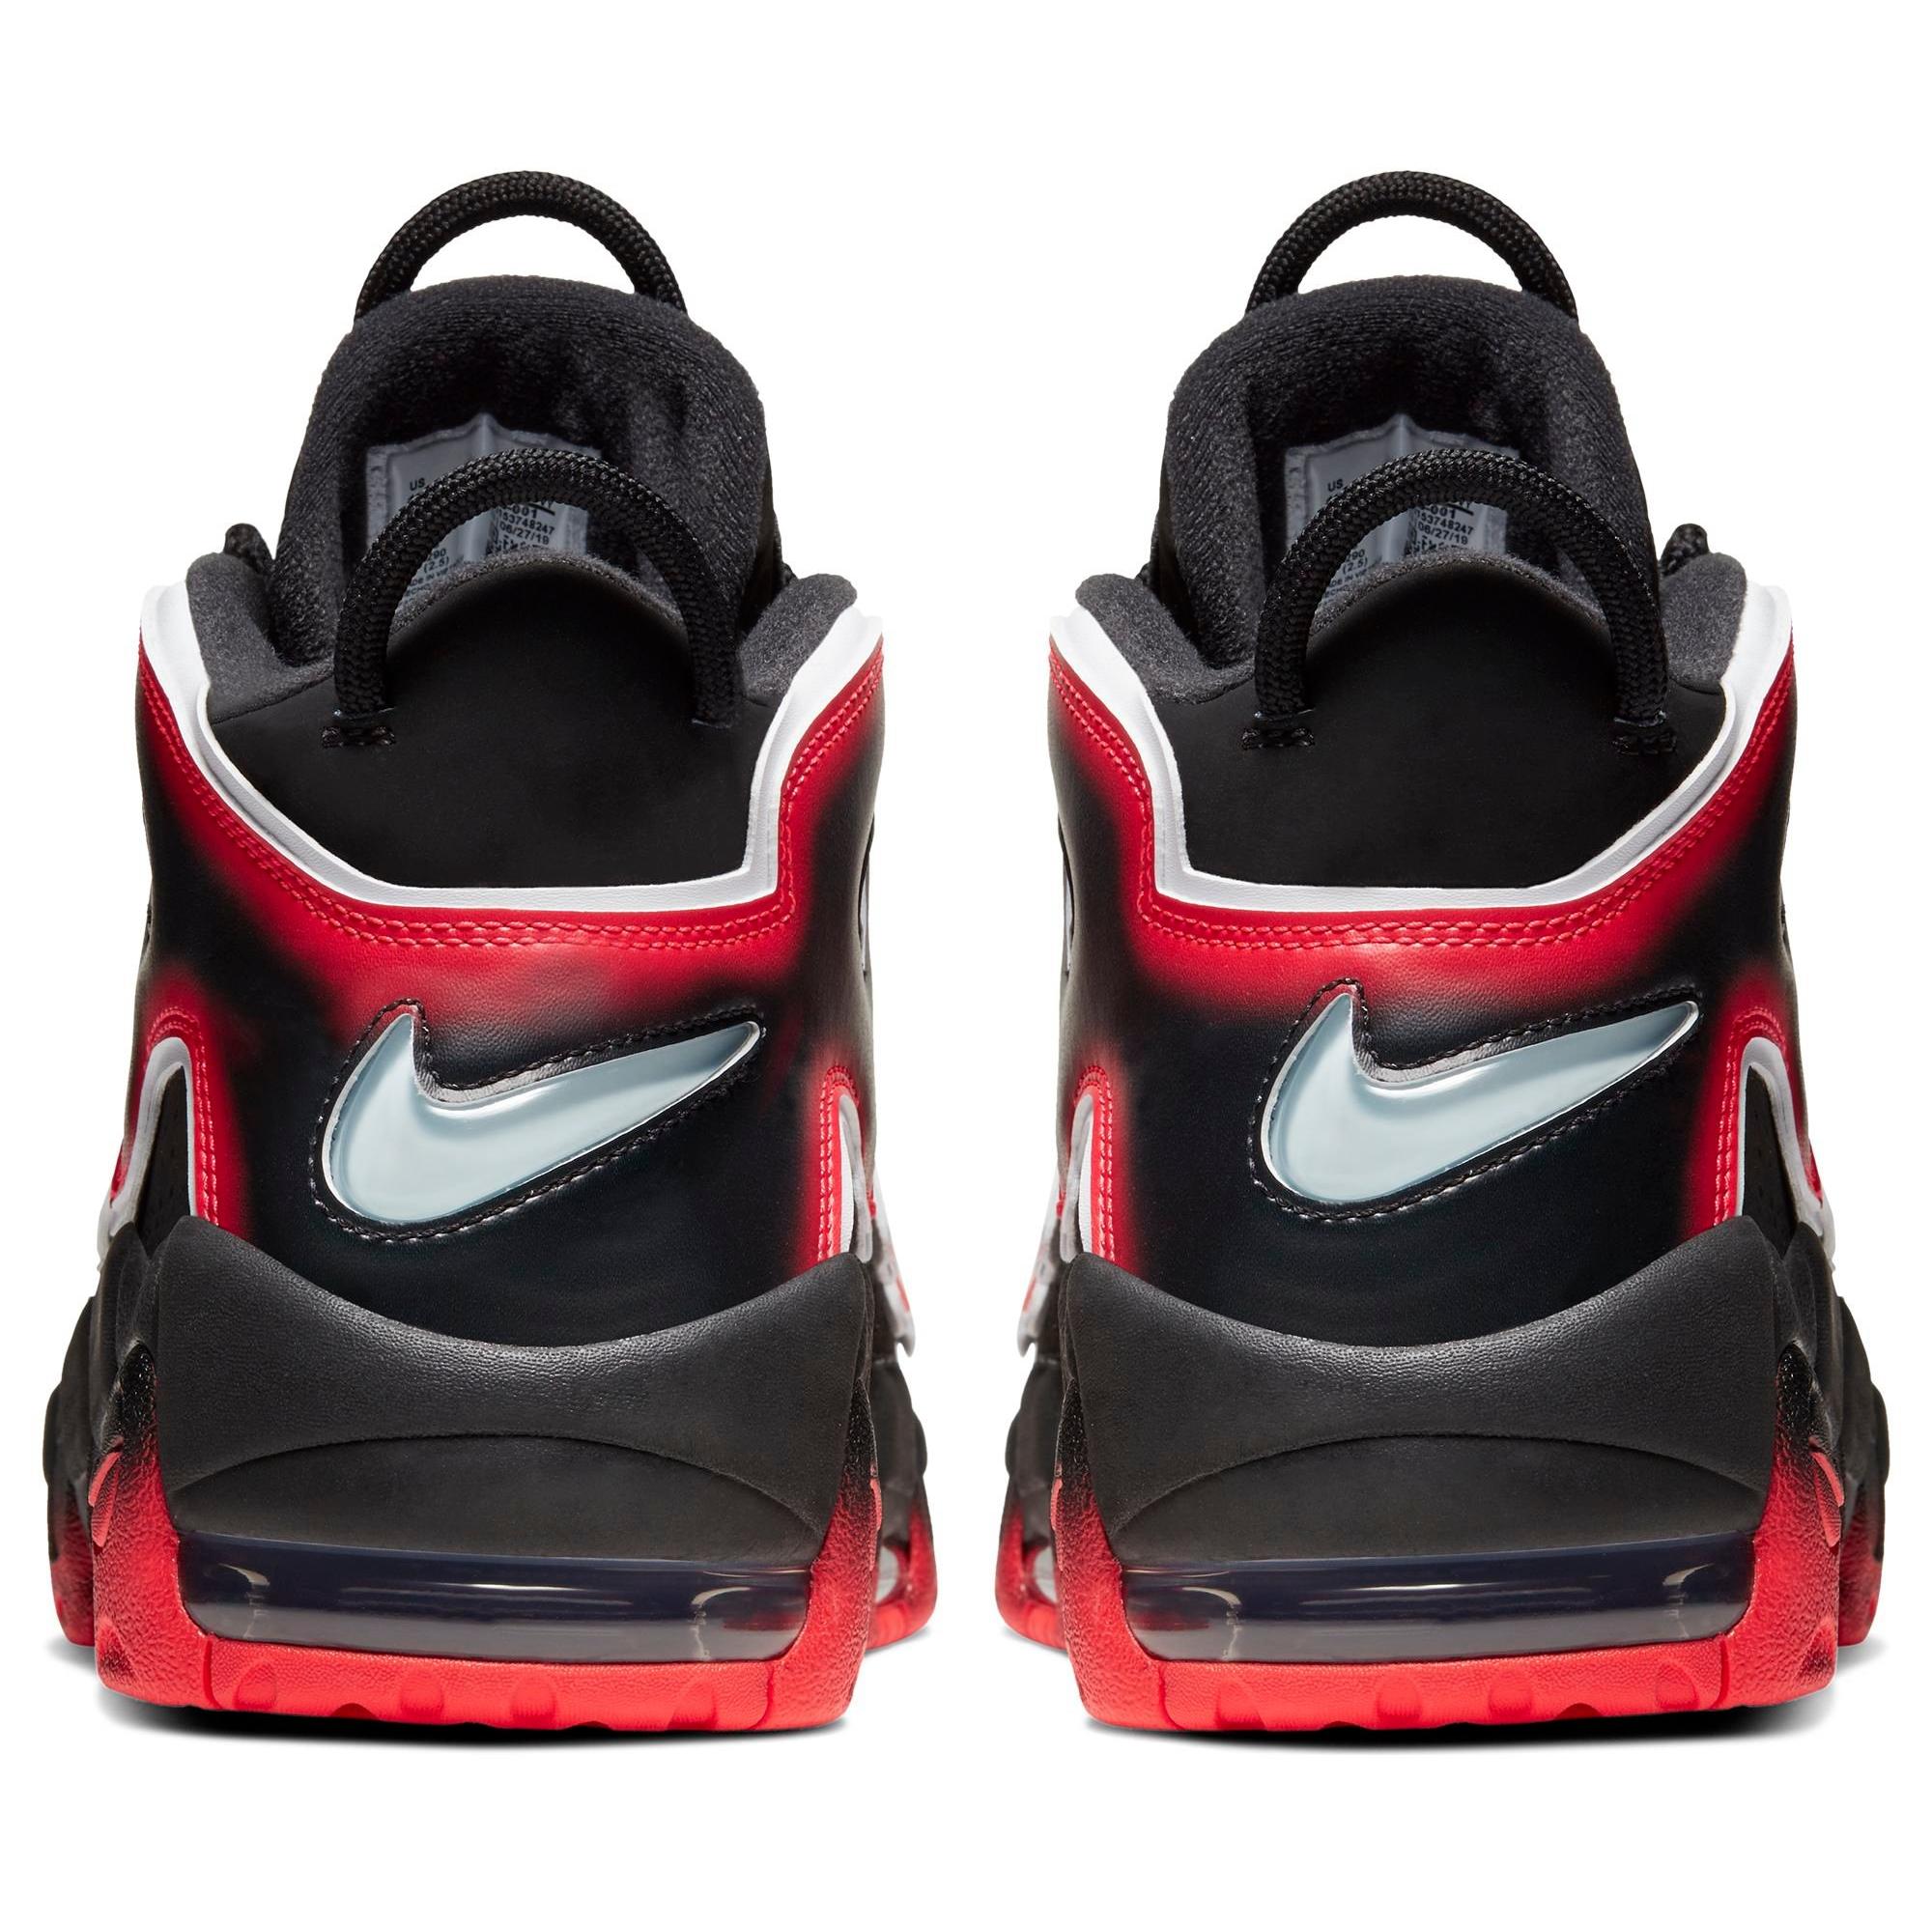 Sneakers Release Nike Air More Uptempo 96 Laser Crimson Black Red Basketball Shoe